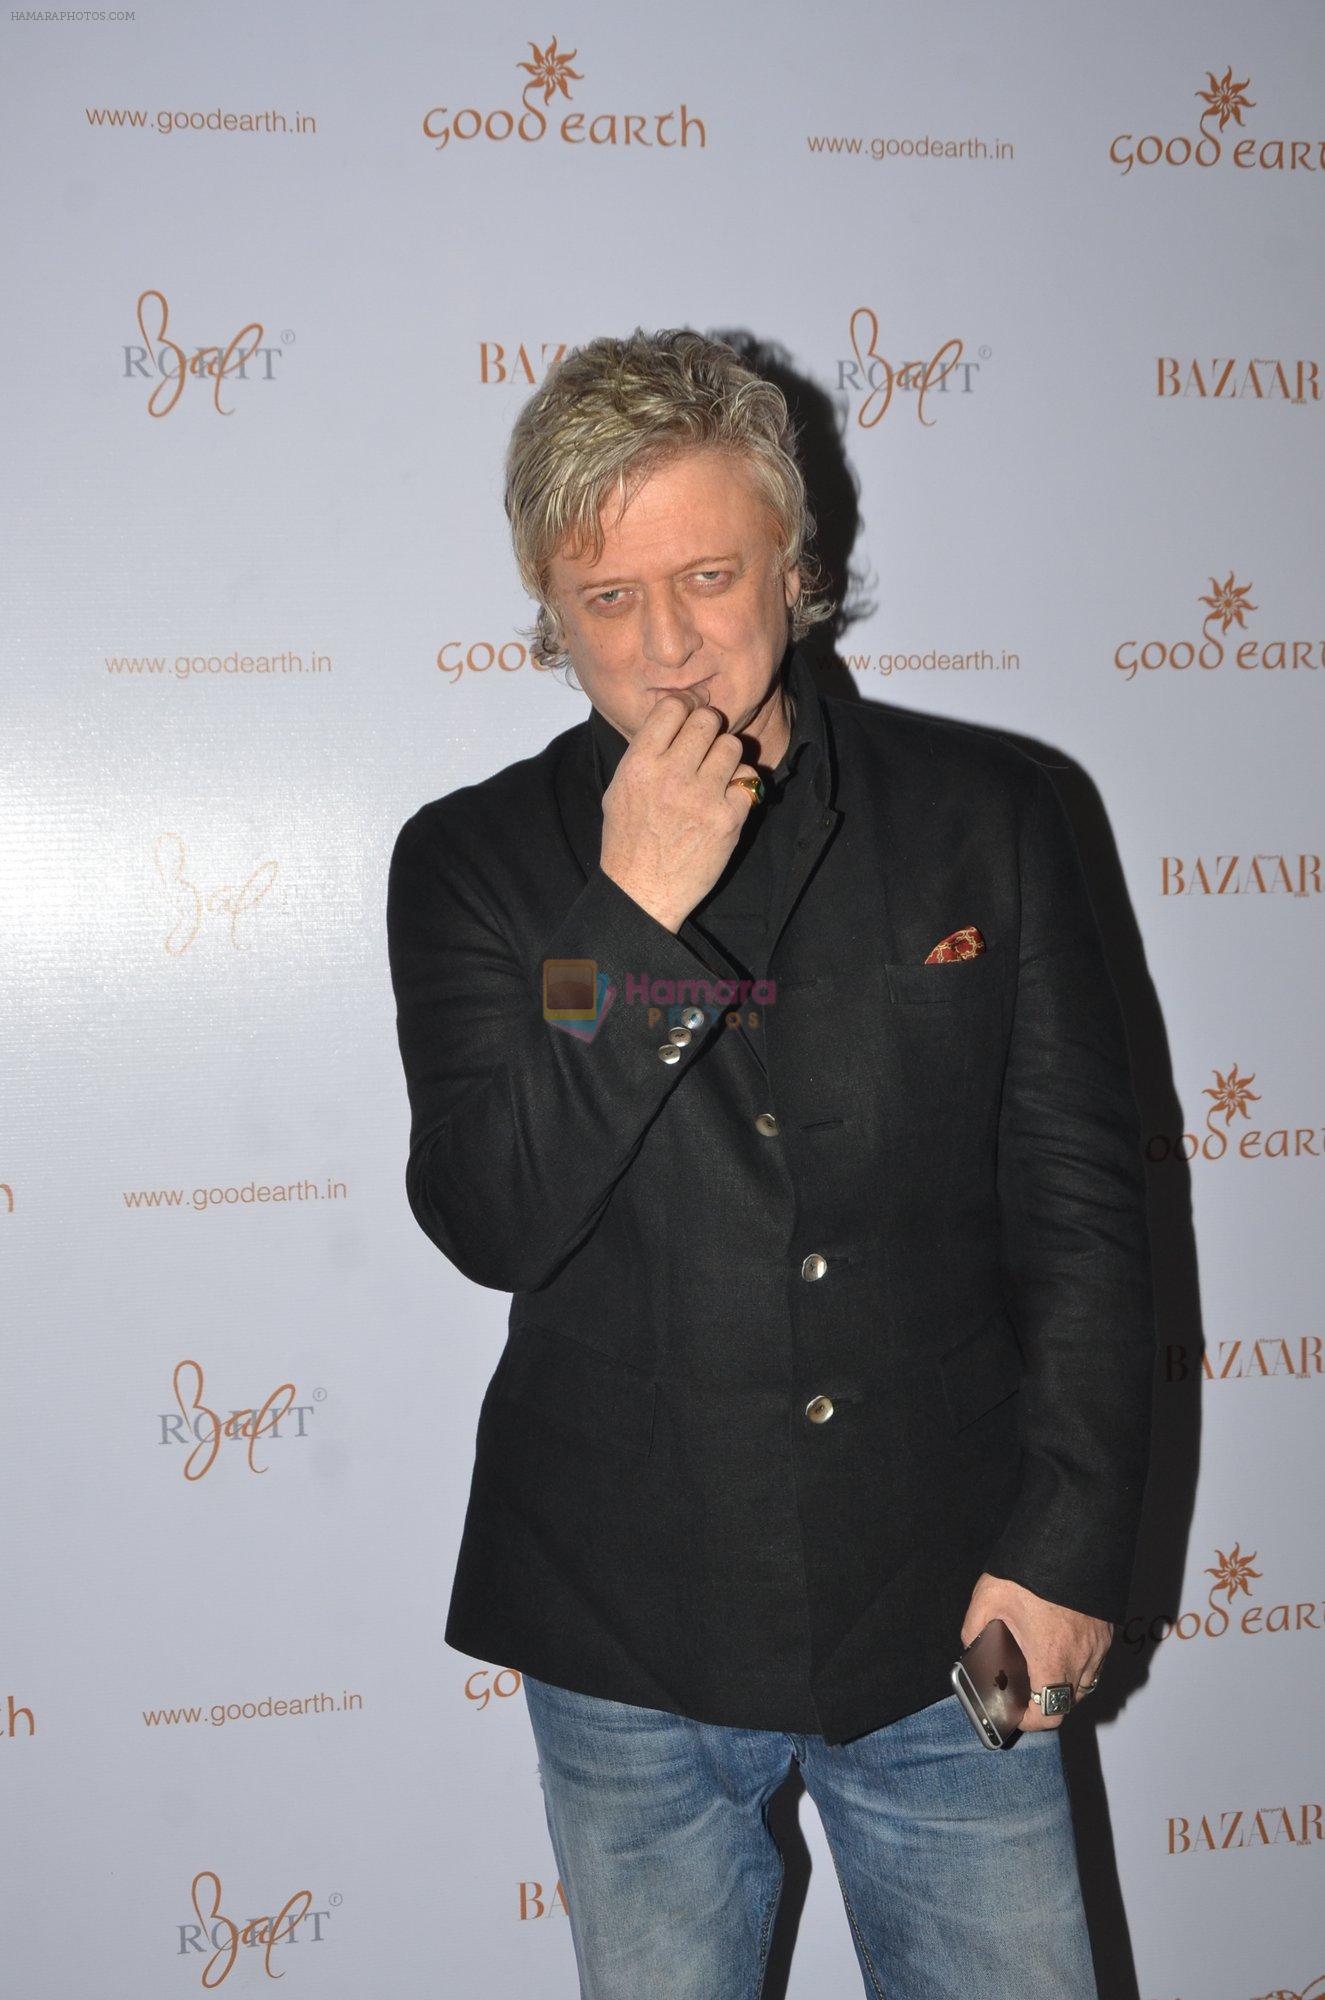 Rohit Bal's launch at Good Earth in Mumbai on 12th Nov 2016